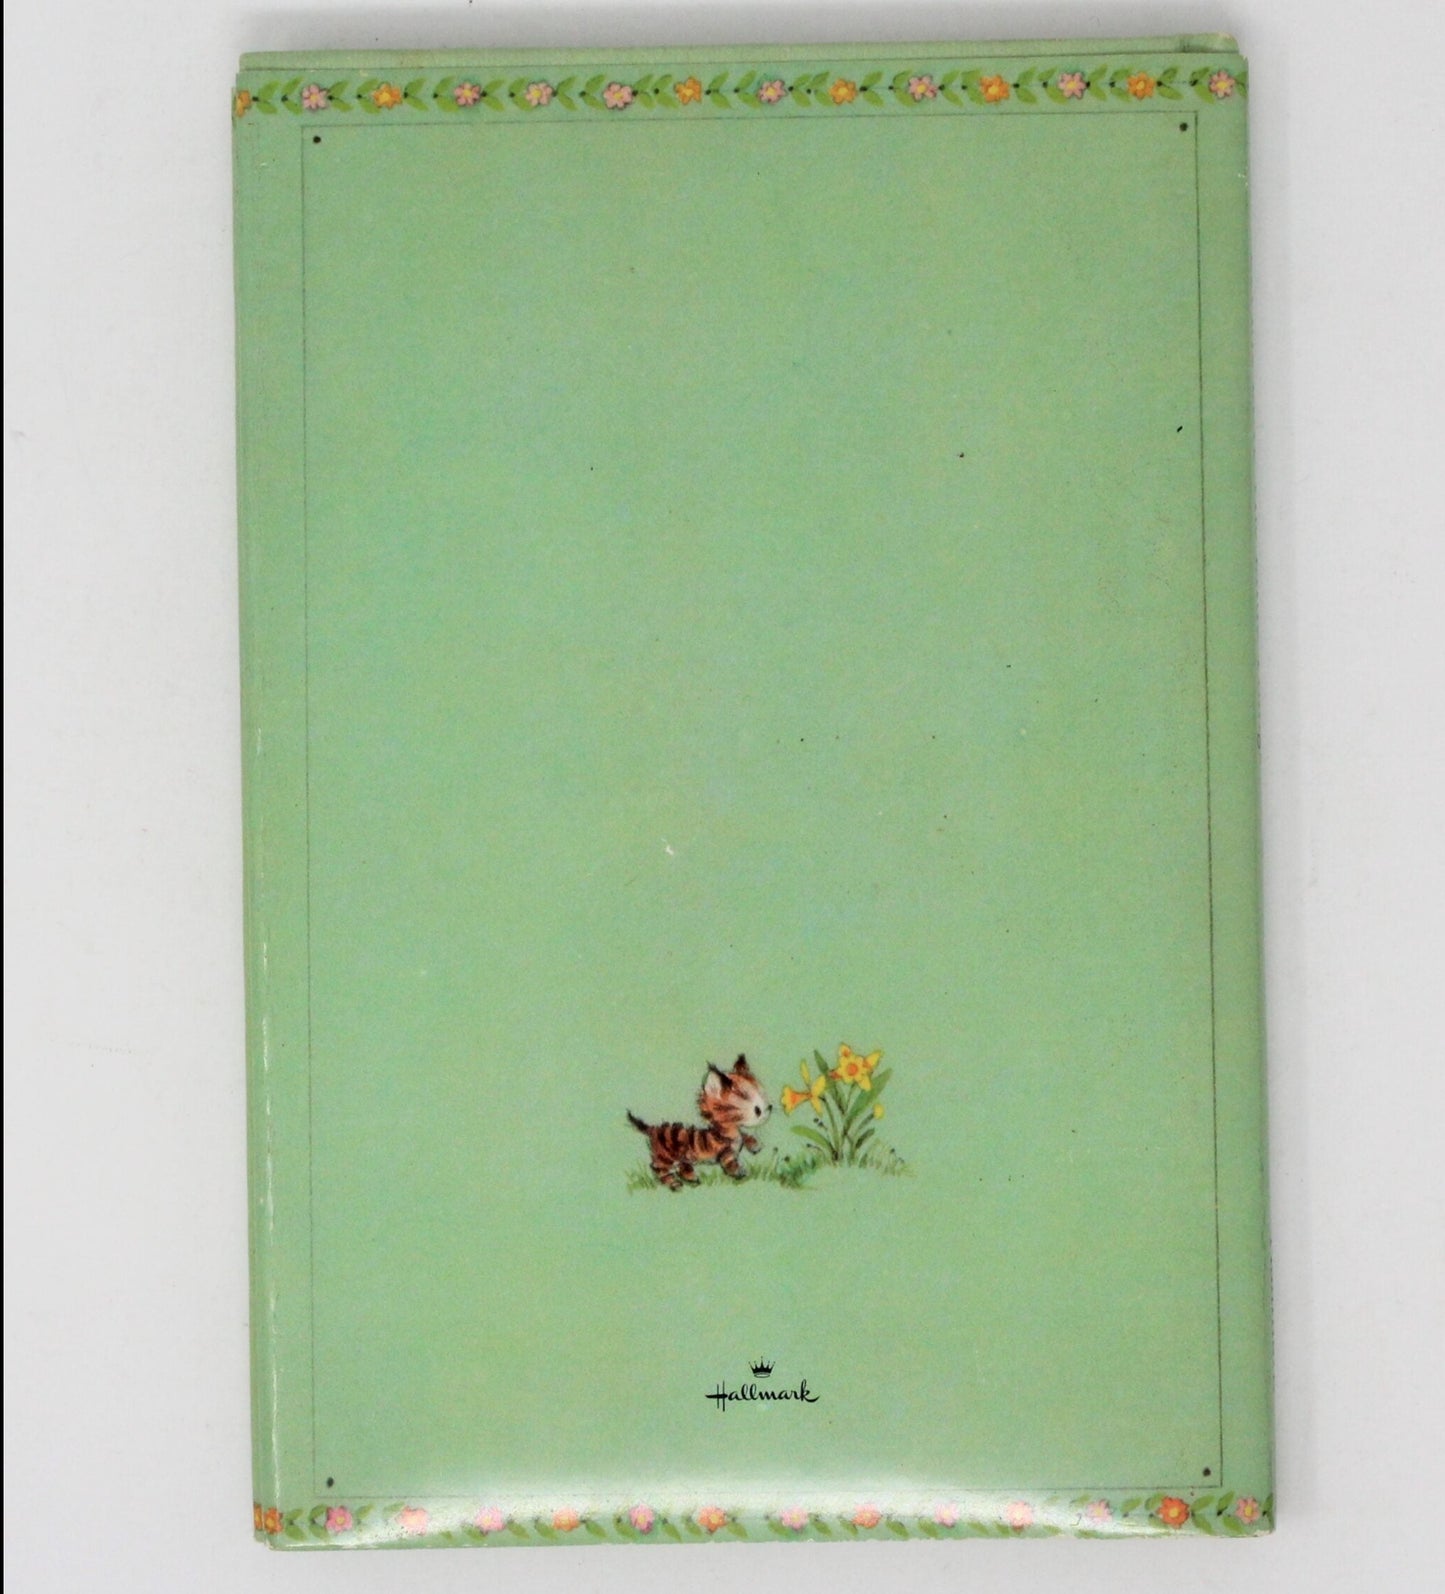 Book, Hallmark, Let Me Love the Little Things, Helen Lowrie Marshall, Vintage 1971